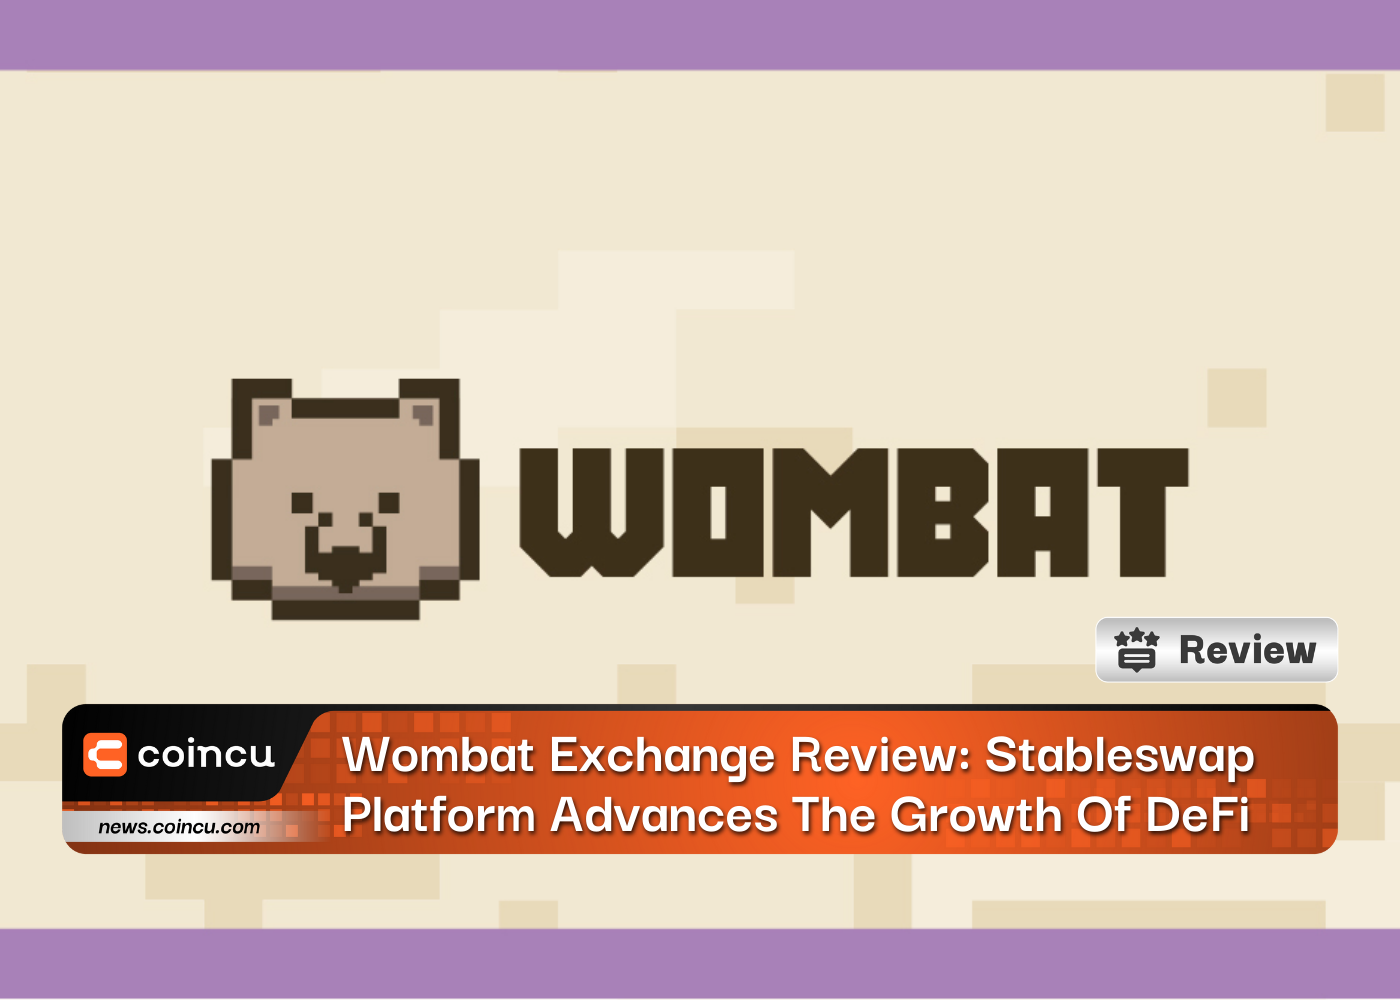 Wombat Exchange Review: Stableswap Platform Advances The Growth Of DeFi